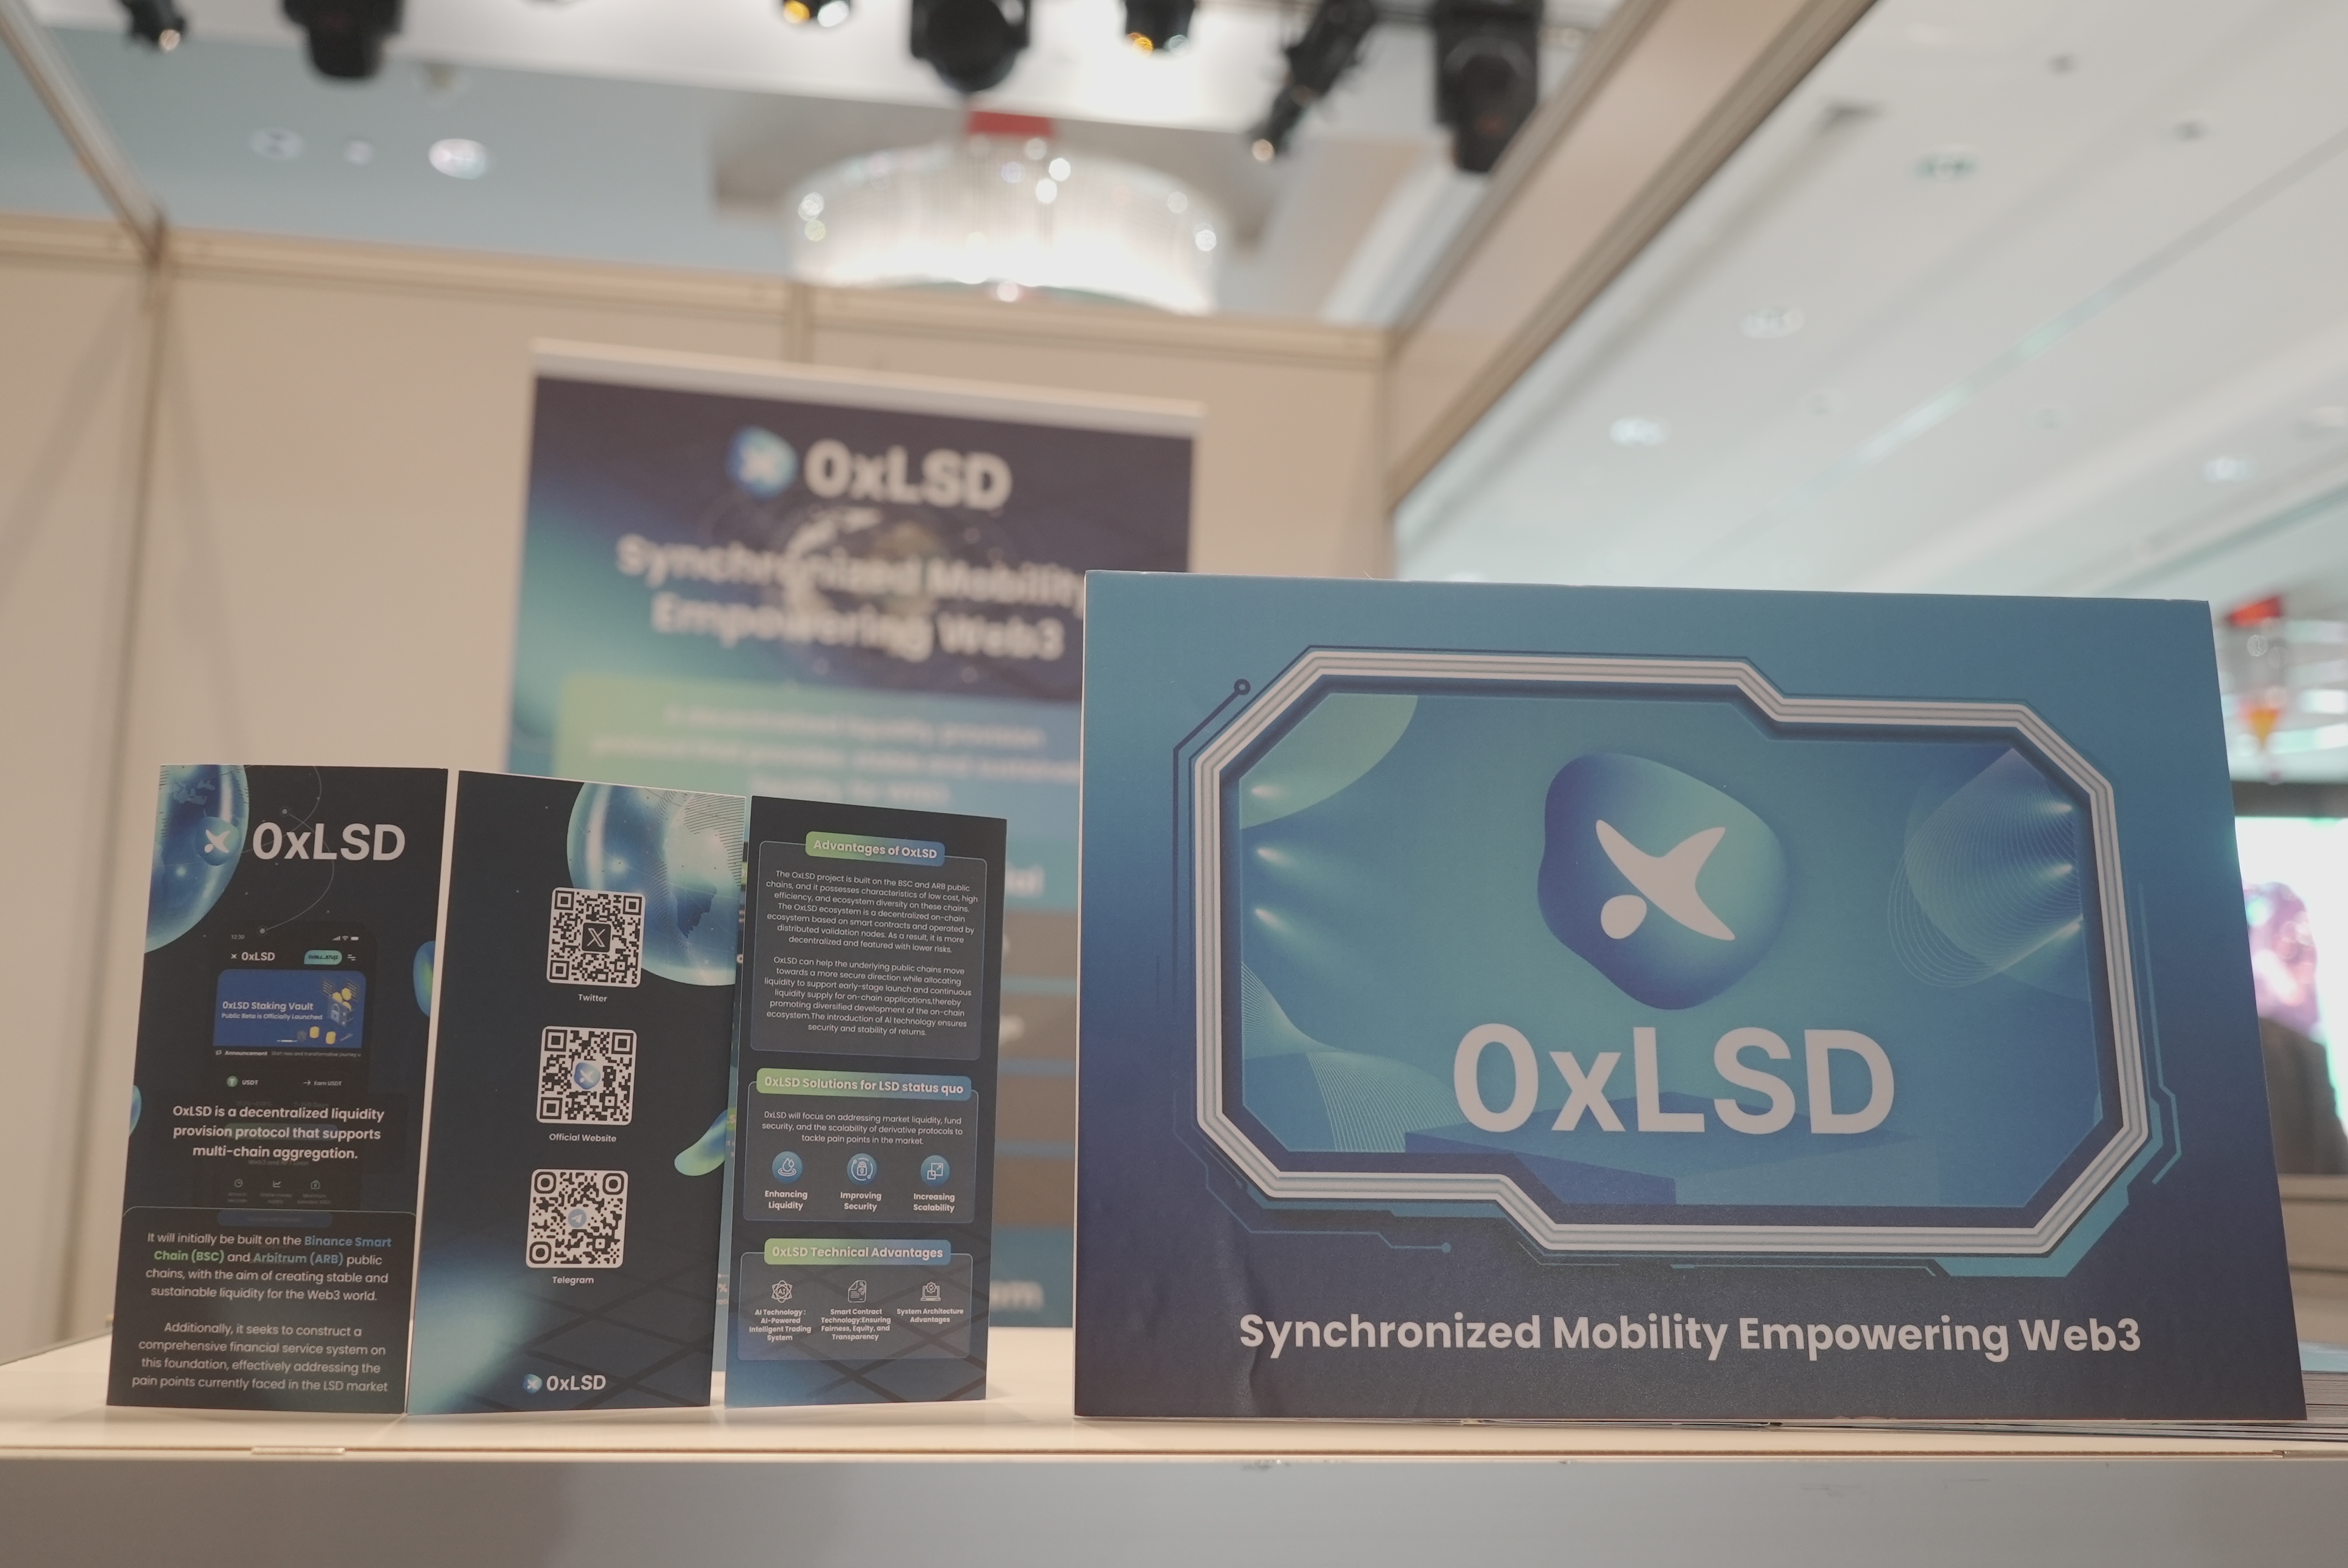 0xLSD was invited to participate in the Dubai Summit alongside prominent projects such as Google, Mastercard, AWS, Binan